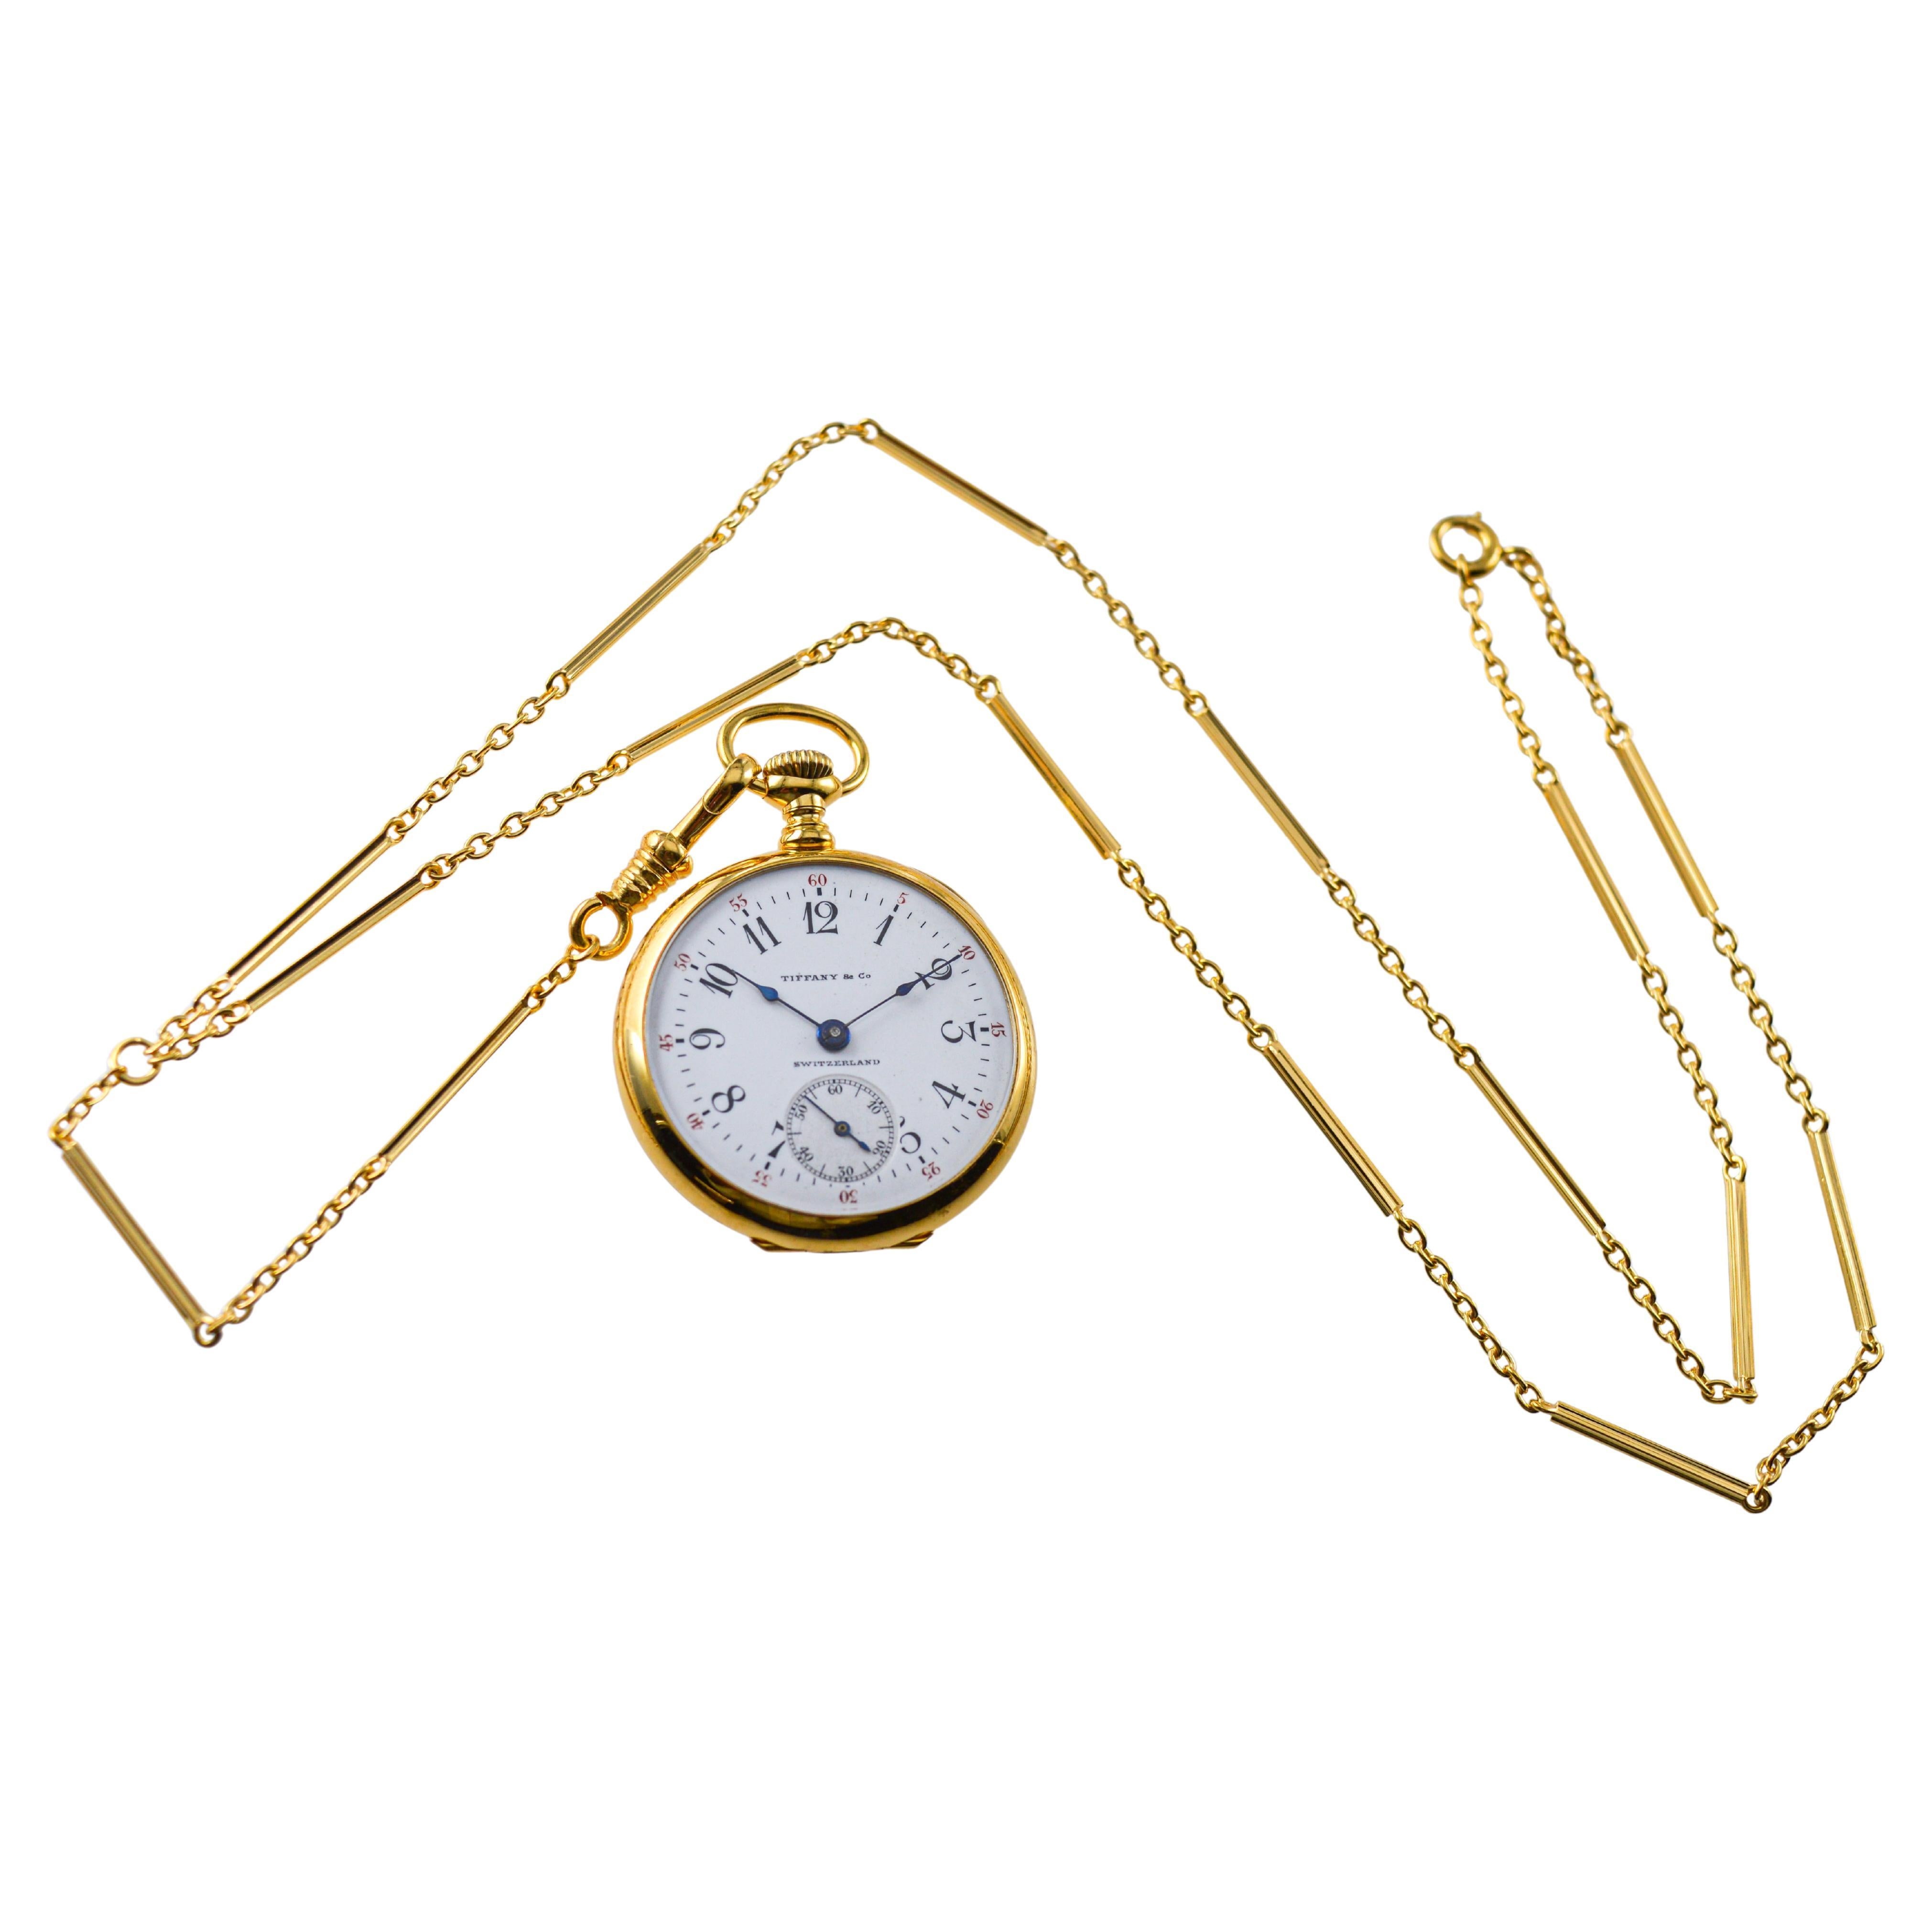 Tiffany & Co 18Kt Gold Pendant Watch with Gold Chain from 1912 Enamel Dial